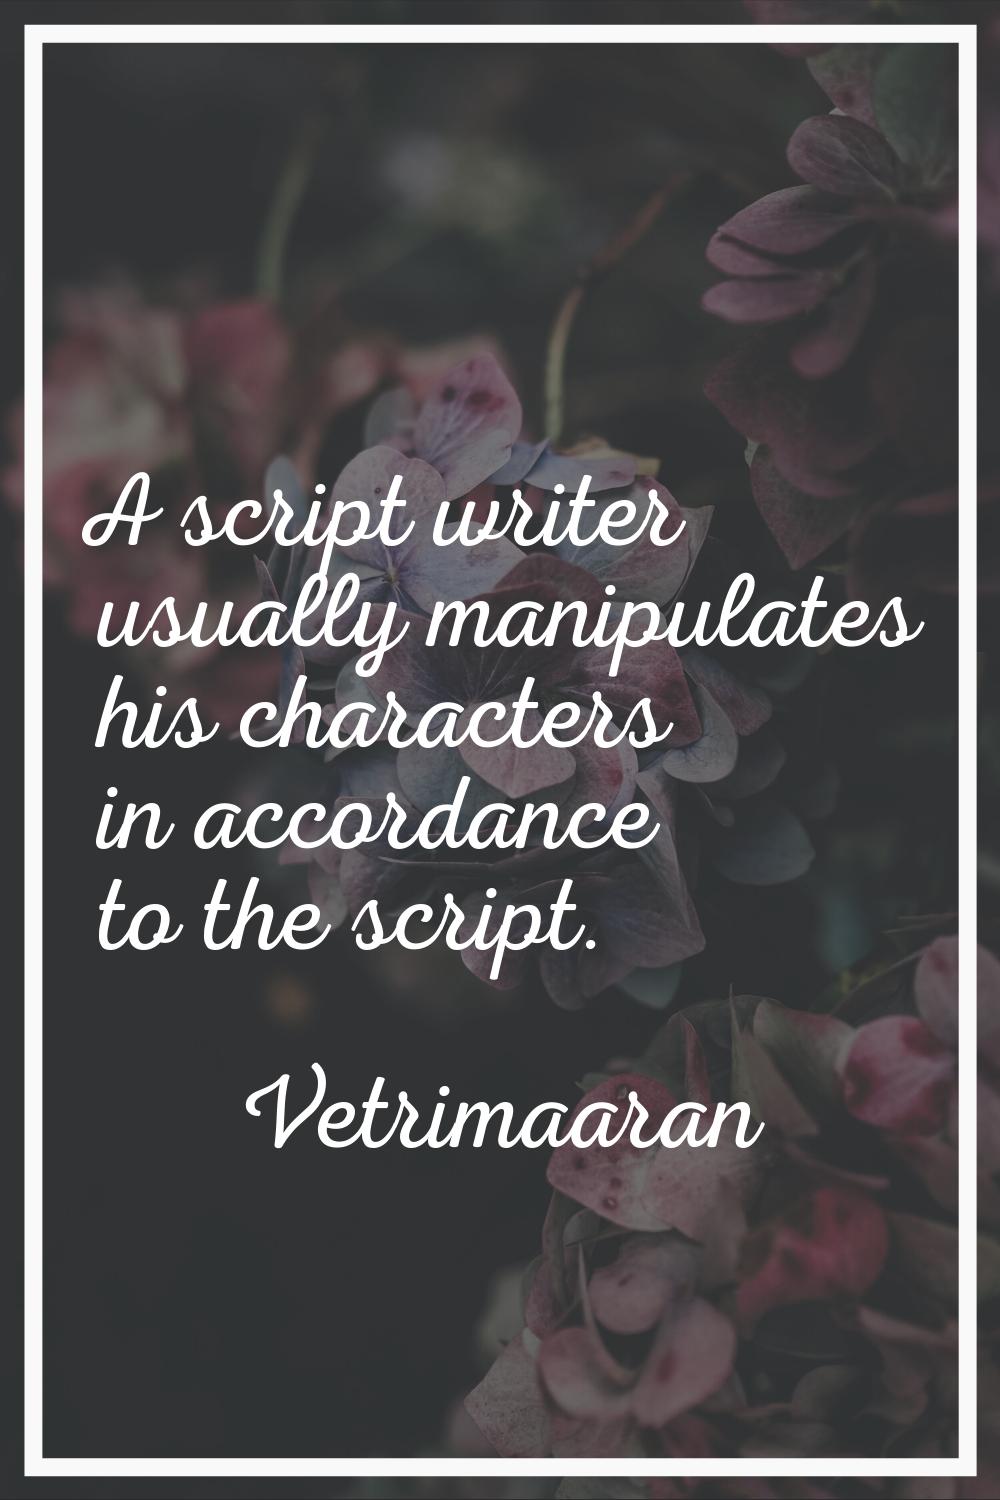 A script writer usually manipulates his characters in accordance to the script.